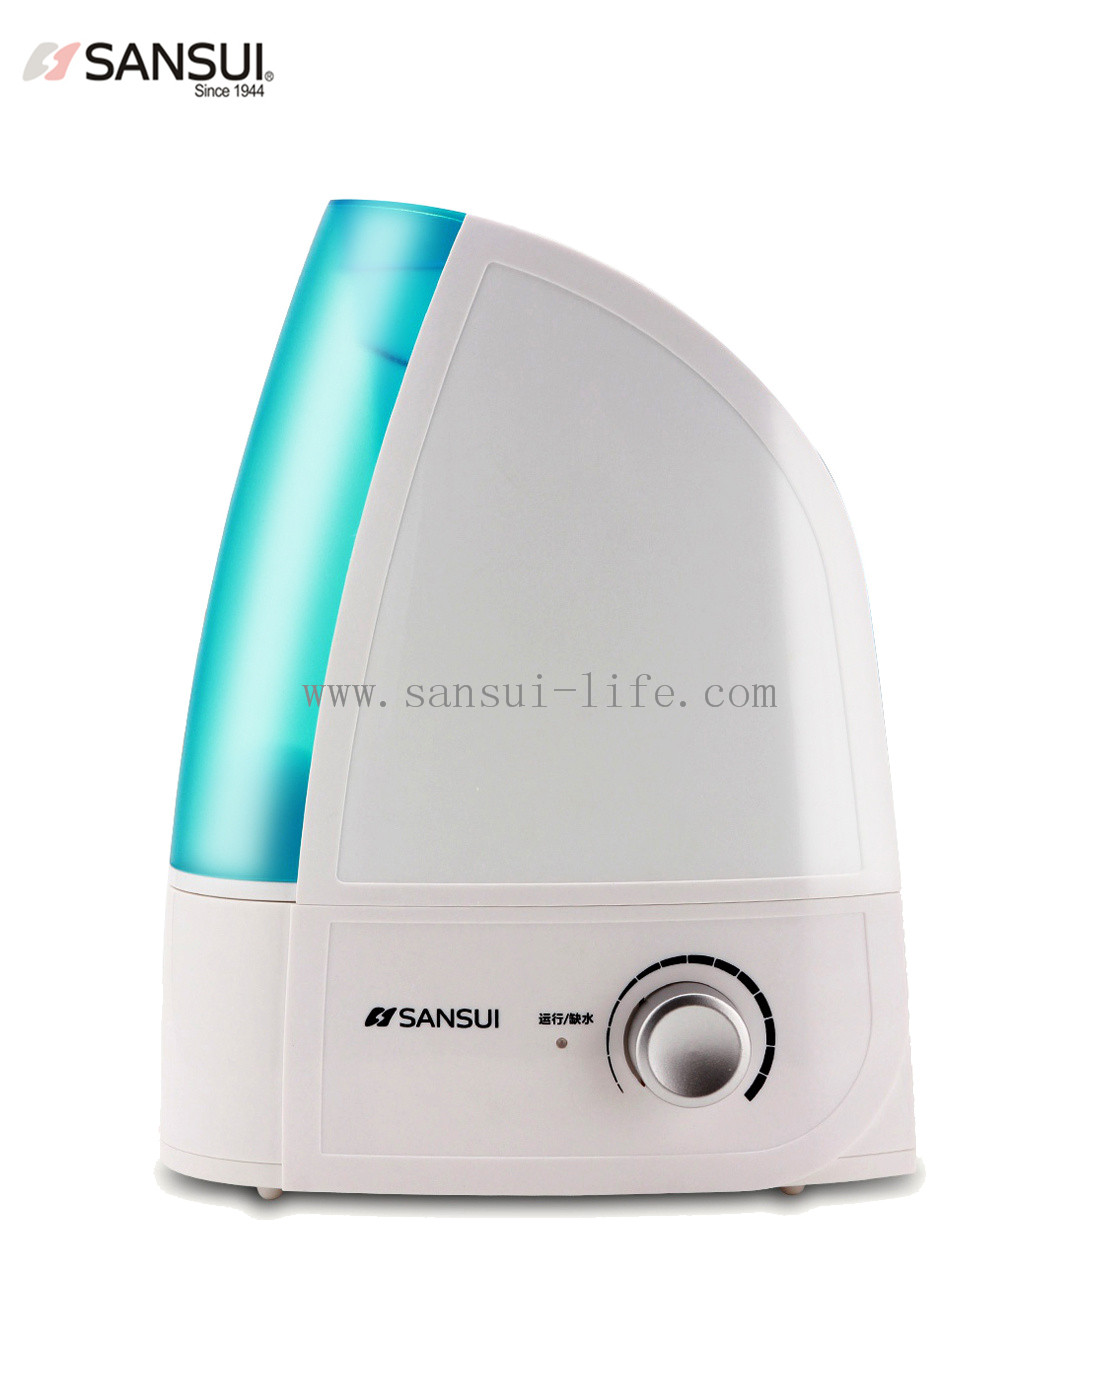 SANSUI Purifier&humidifier, purification filter element, easier to use dry automatic power-off